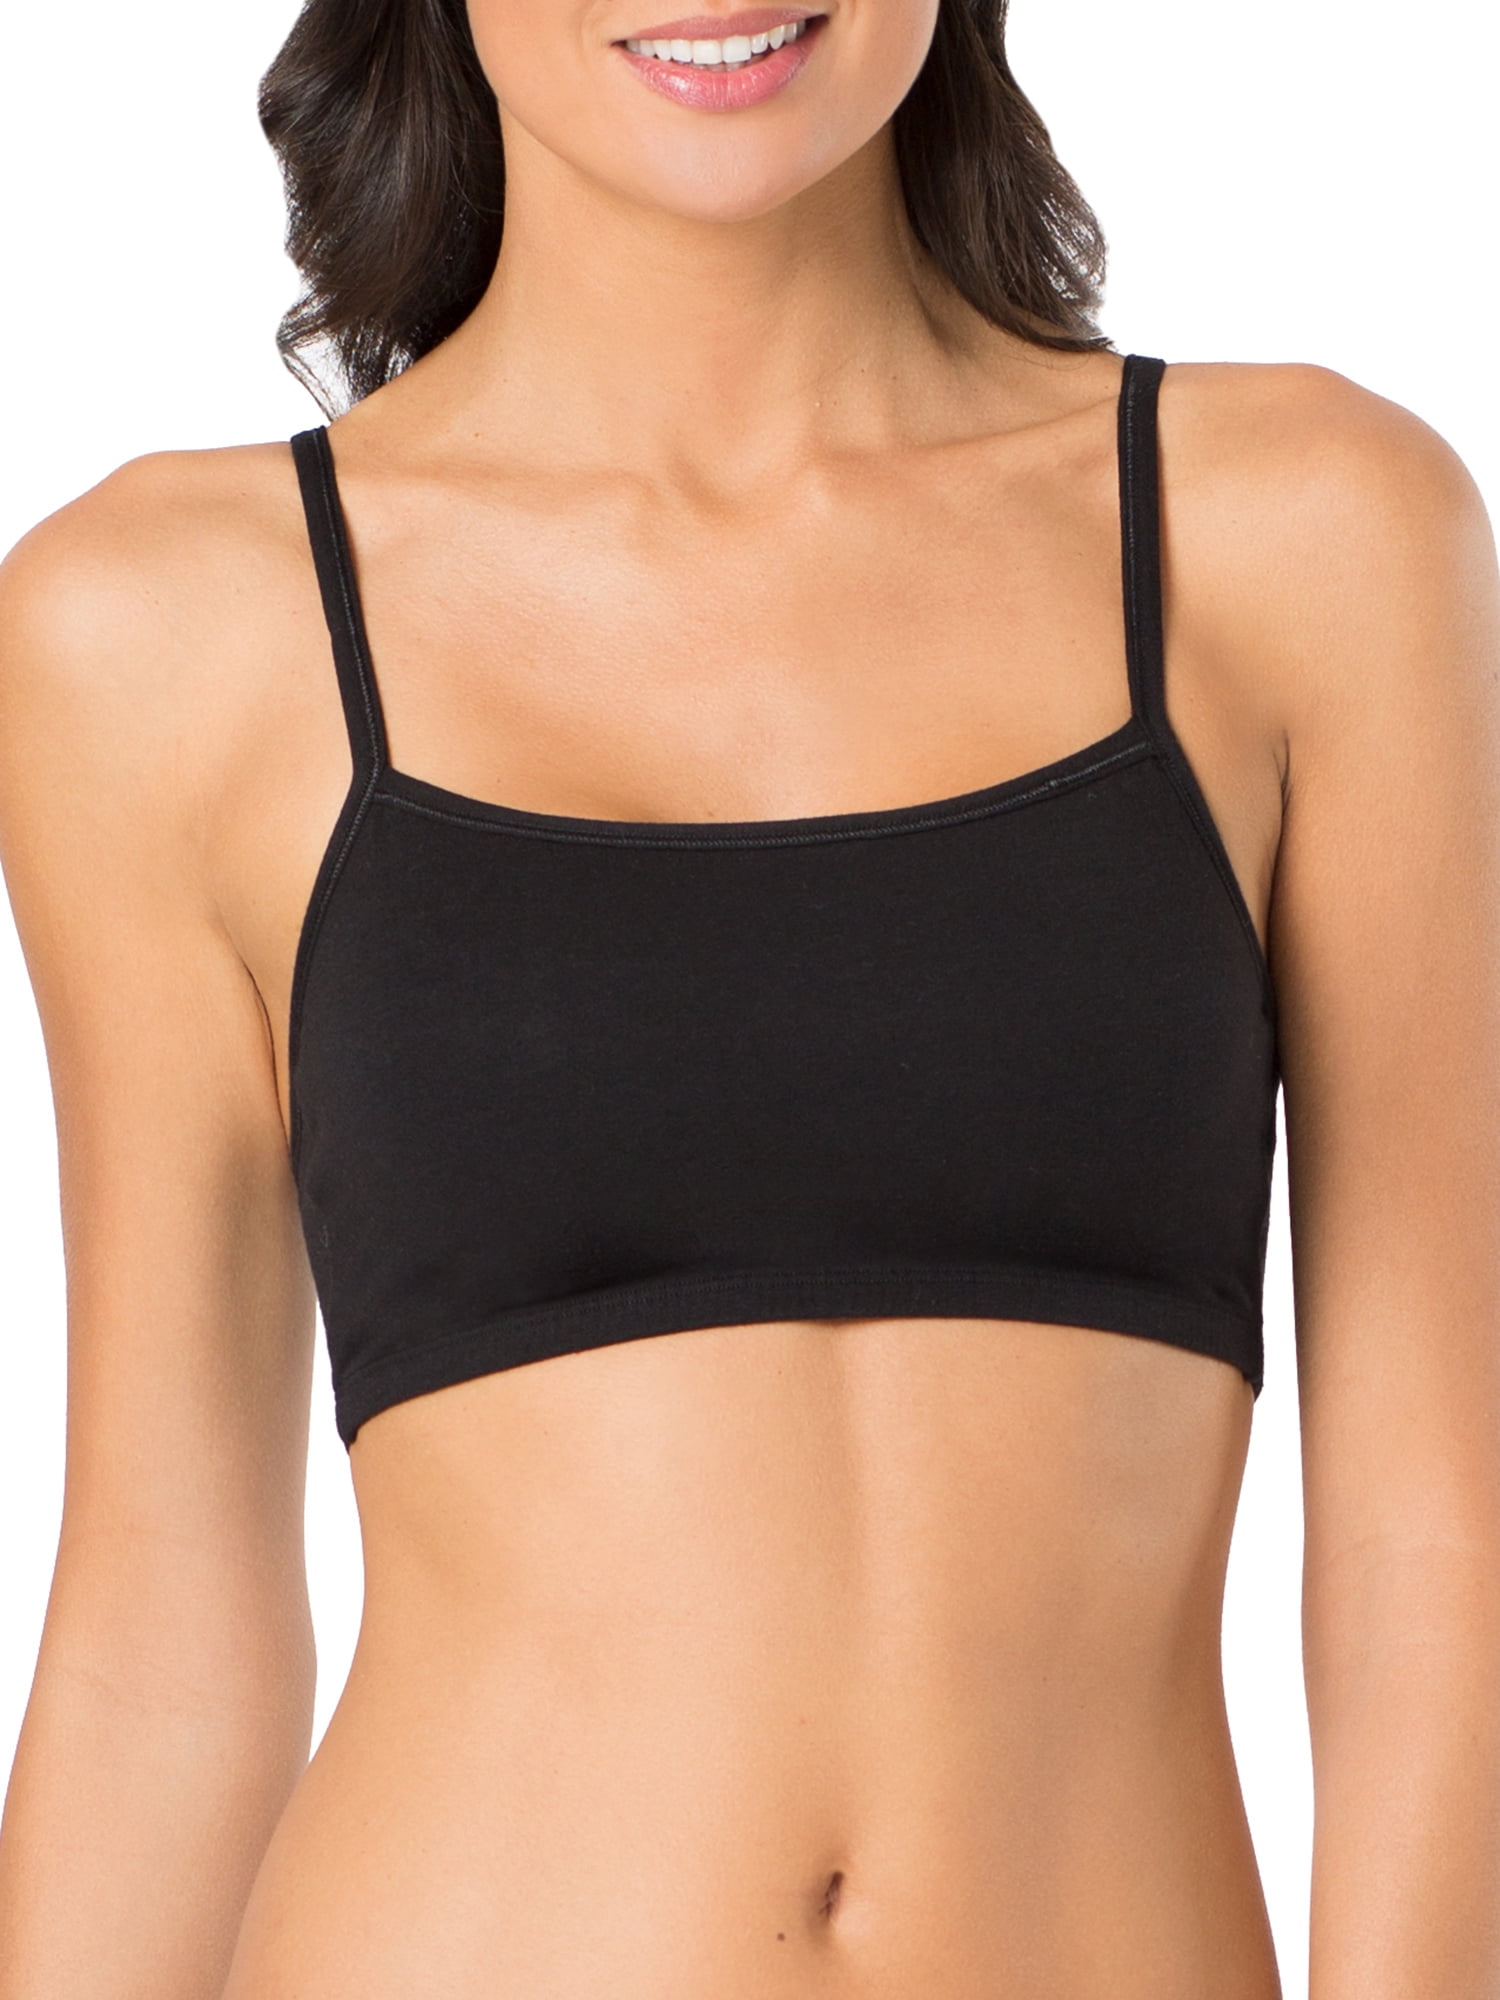 Fruit of the Loom Women's Spaghetti Strap Cotton Sports Bra, 3-Pack, Style- 9036 